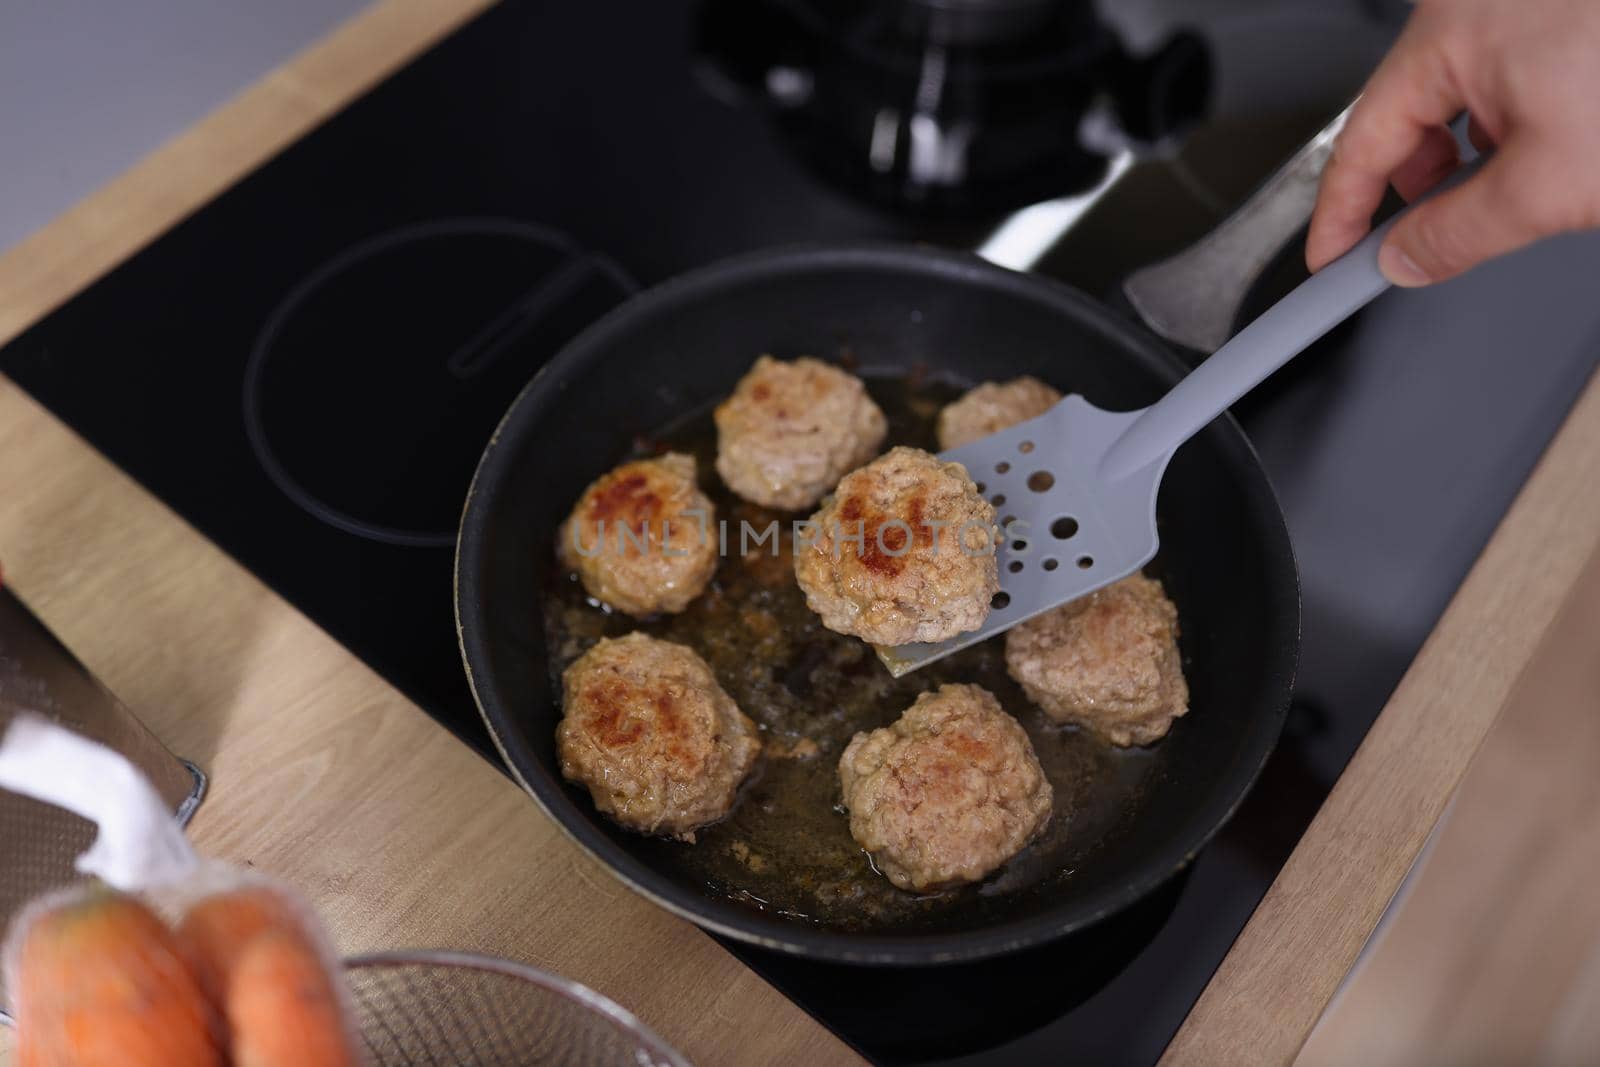 Meat balls beginning to fry in oil in frying pan on kitchen stove by kuprevich